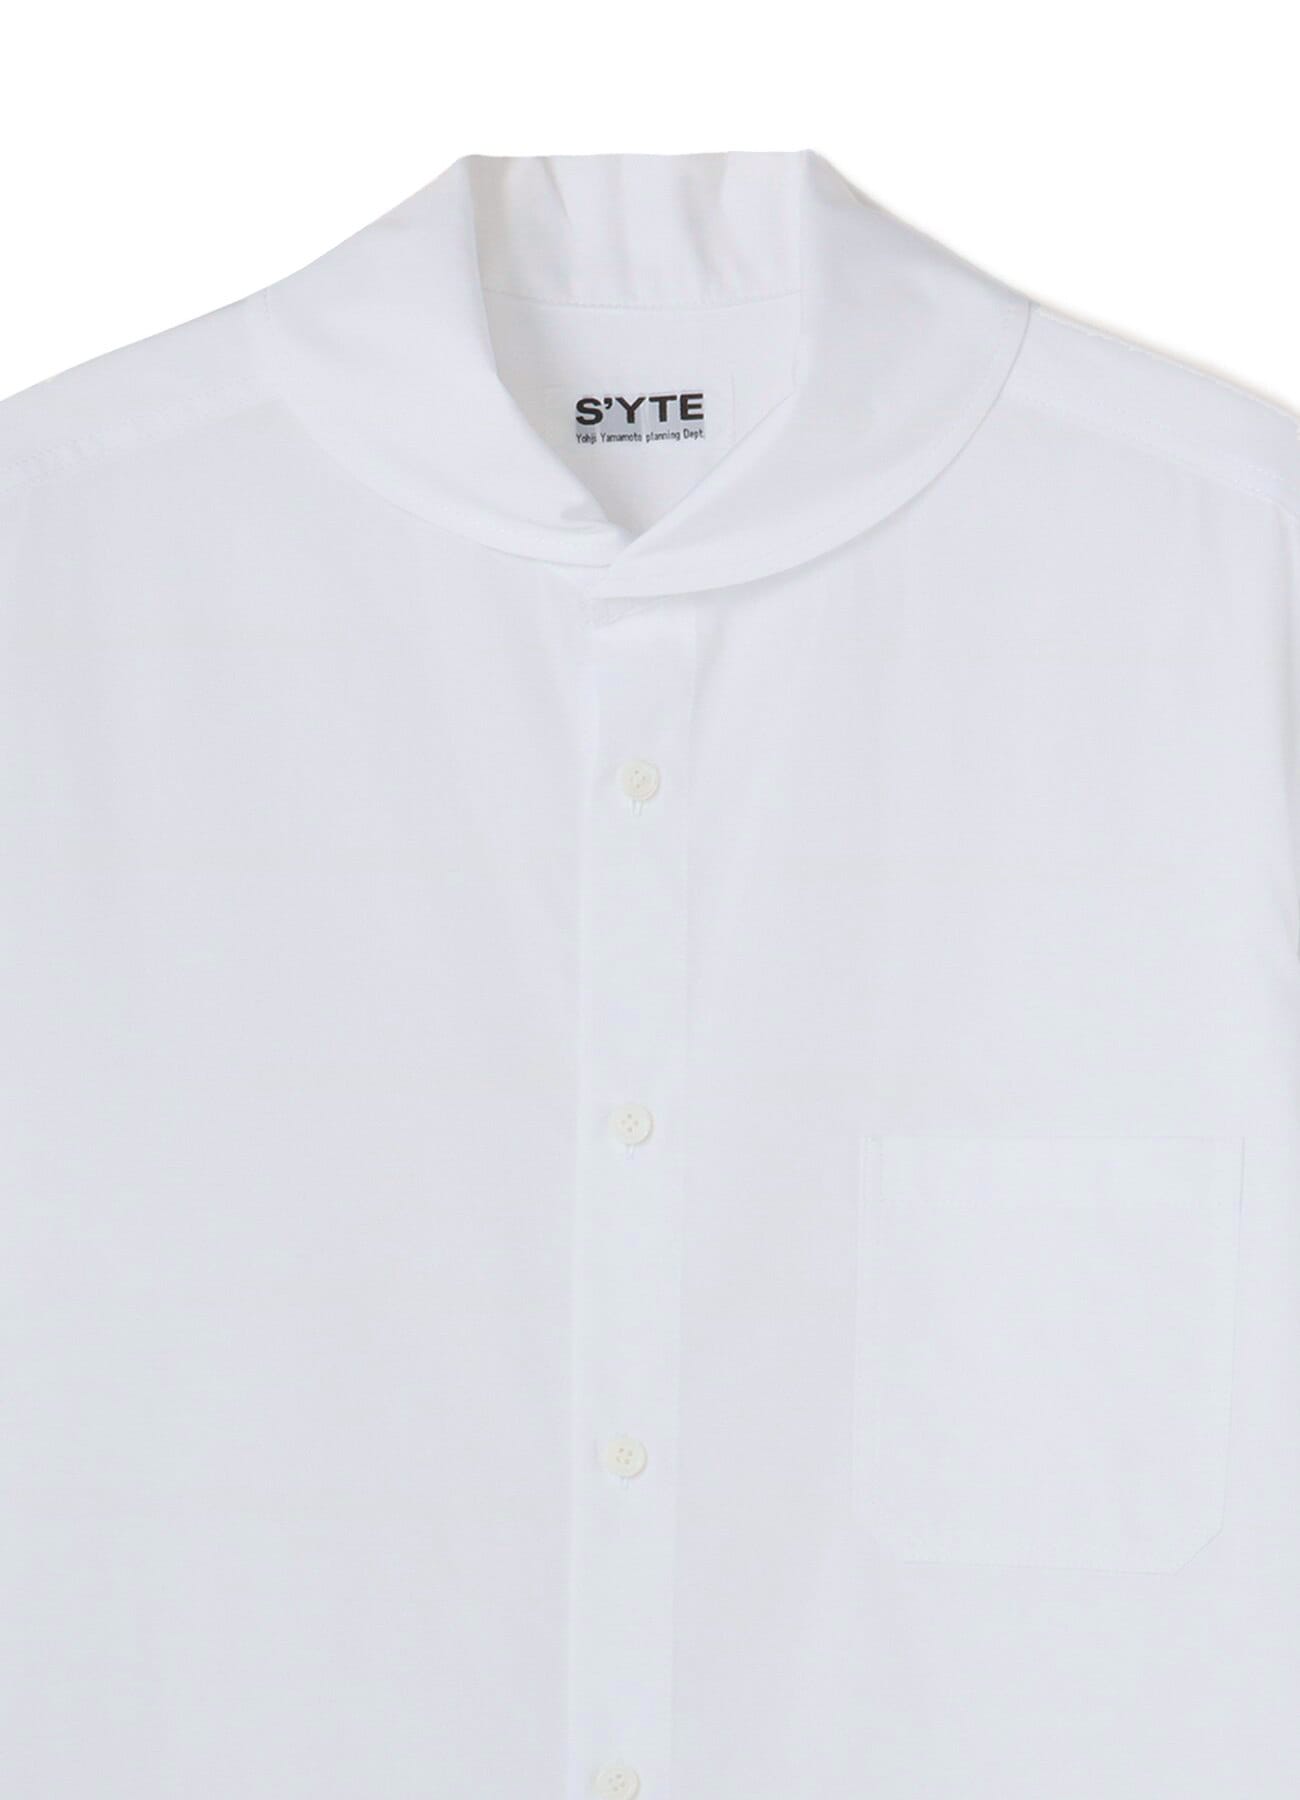 100/2 BROAD SHAWL COLLAR LONG SHIRT(M Whiite): S'YTE｜THE SHOP